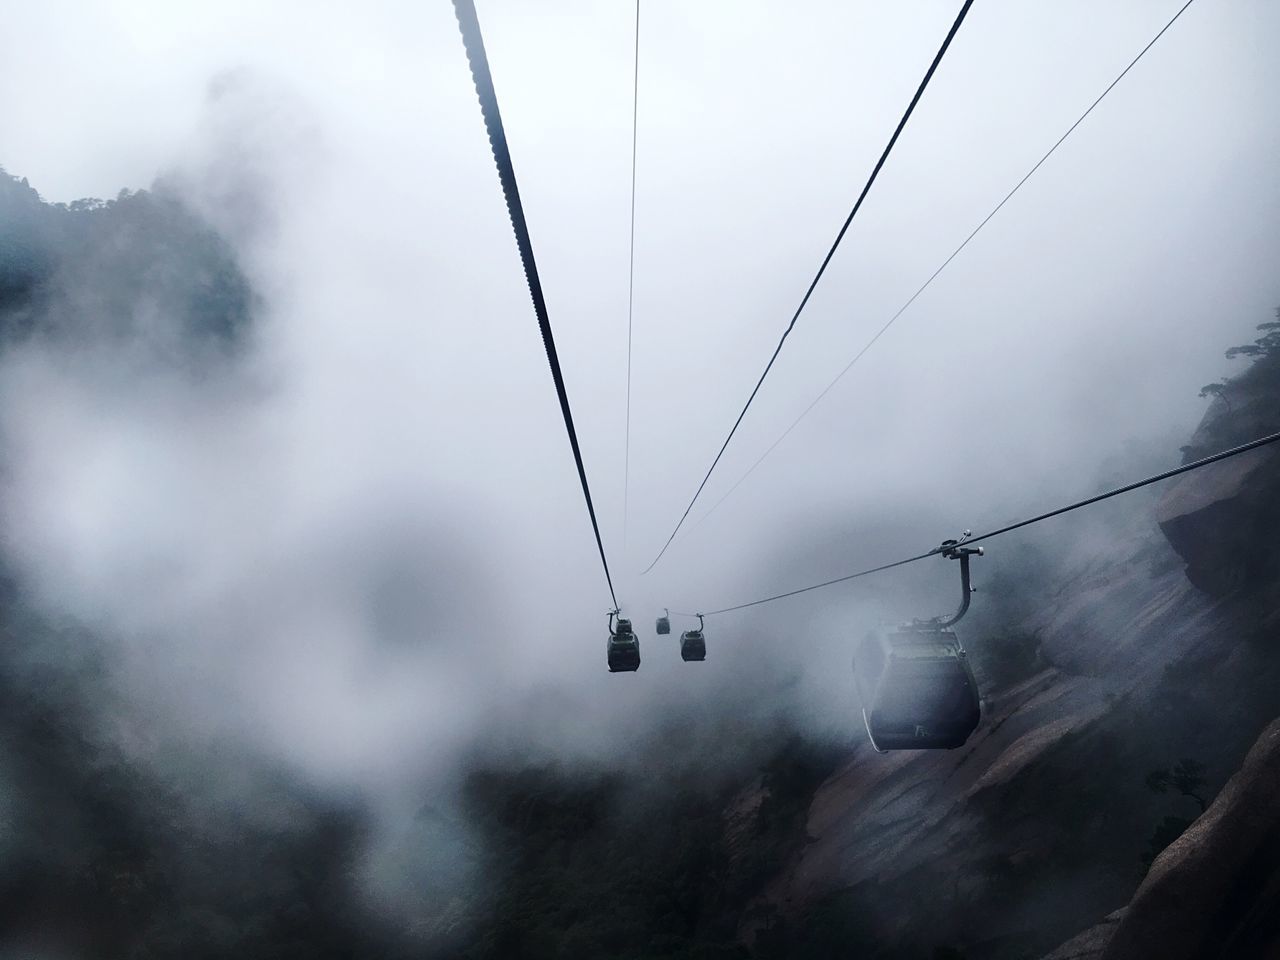 fog, overhead cable car, weather, hanging, sky, outdoors, day, nature, cable, low angle view, transportation, no people, cold temperature, ski lift, mountain, beauty in nature, tree